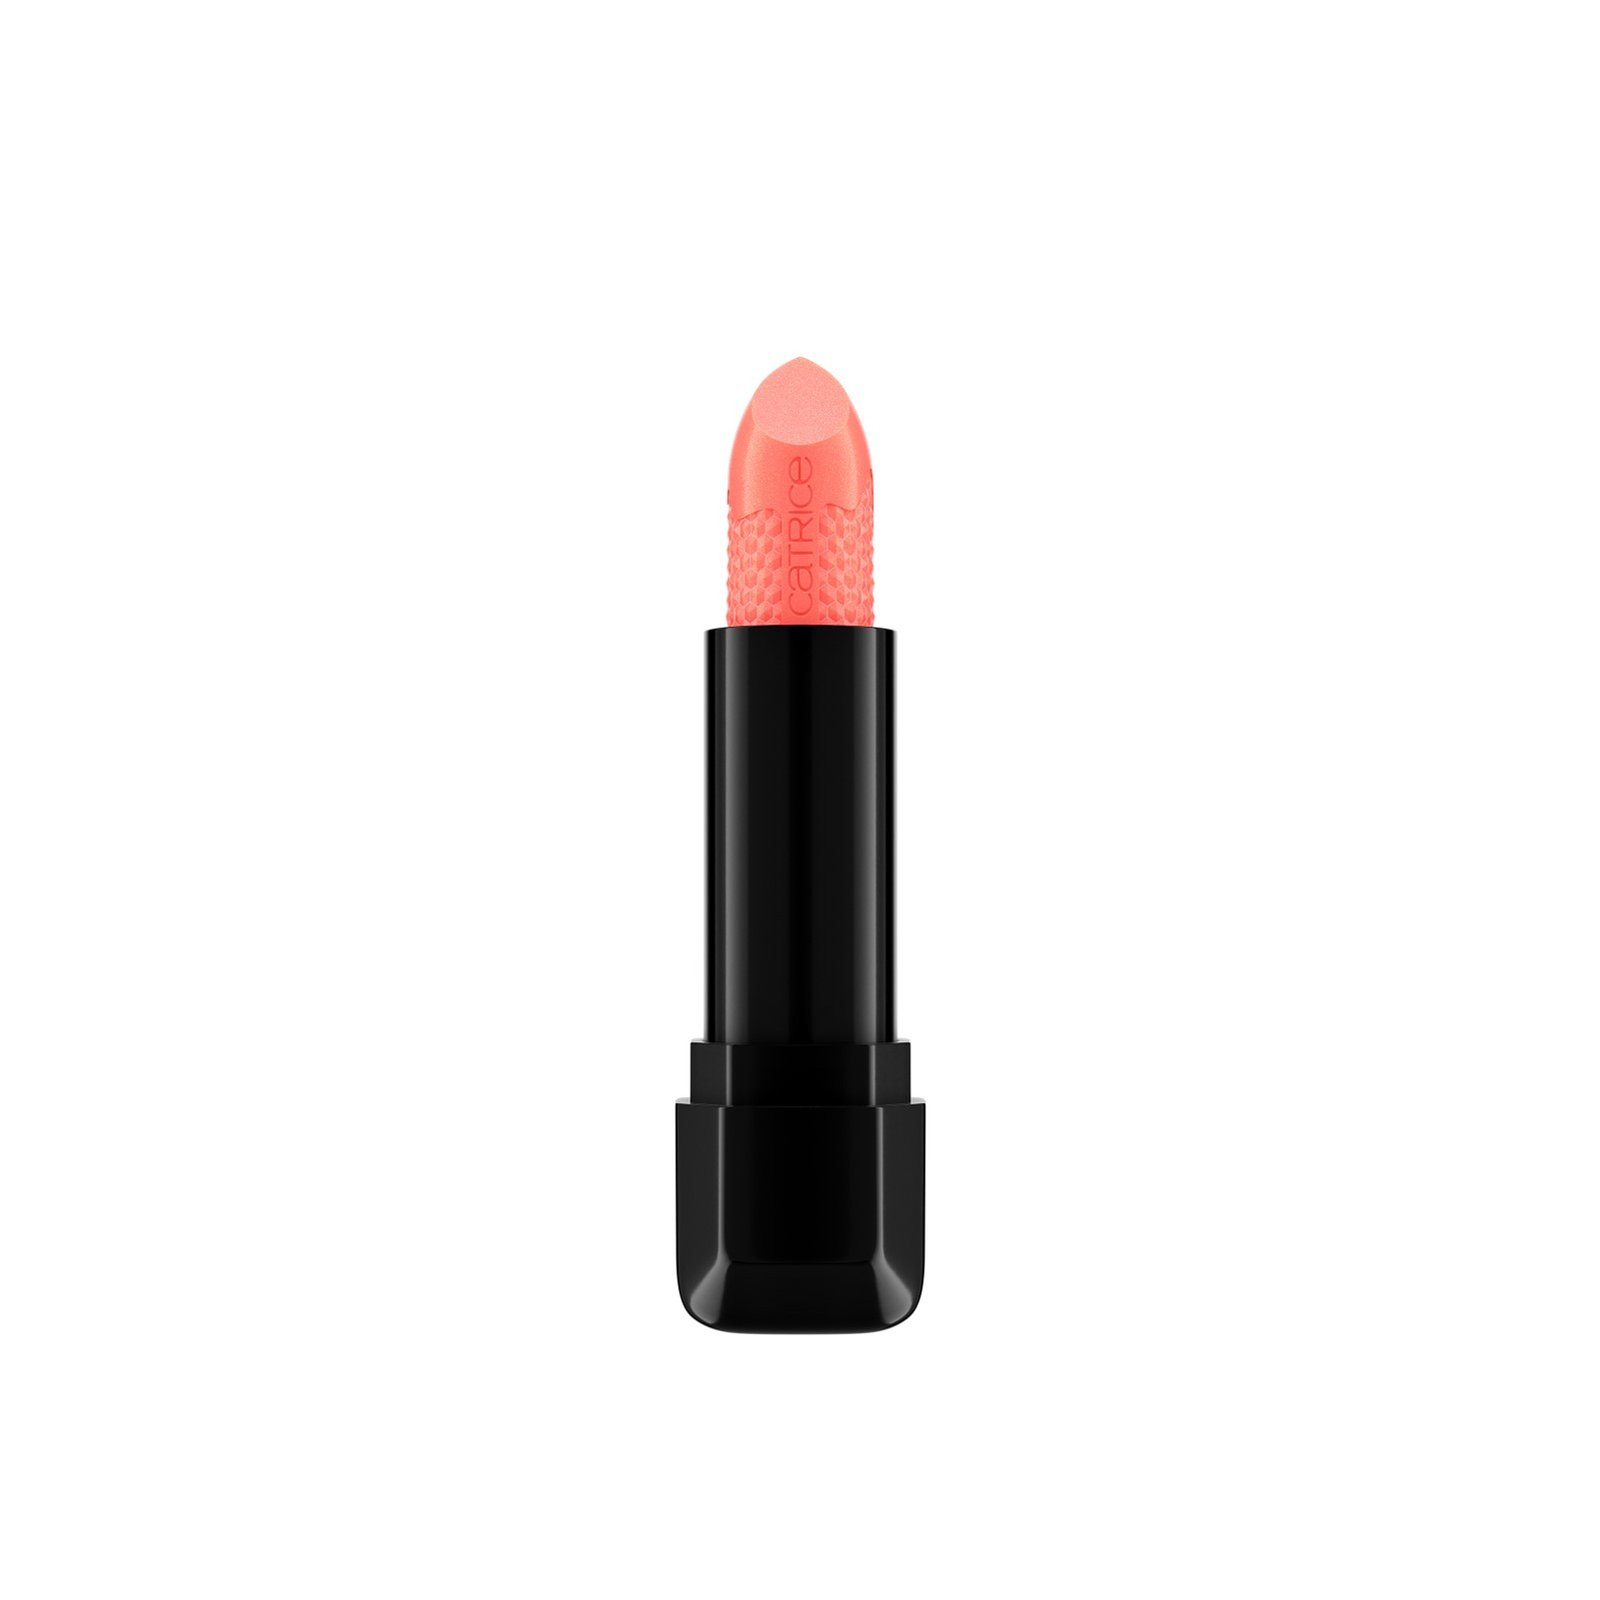 Catrice Shine Bomb Lipstick 060 Blooming Coral 3.5g (0.12 oz)